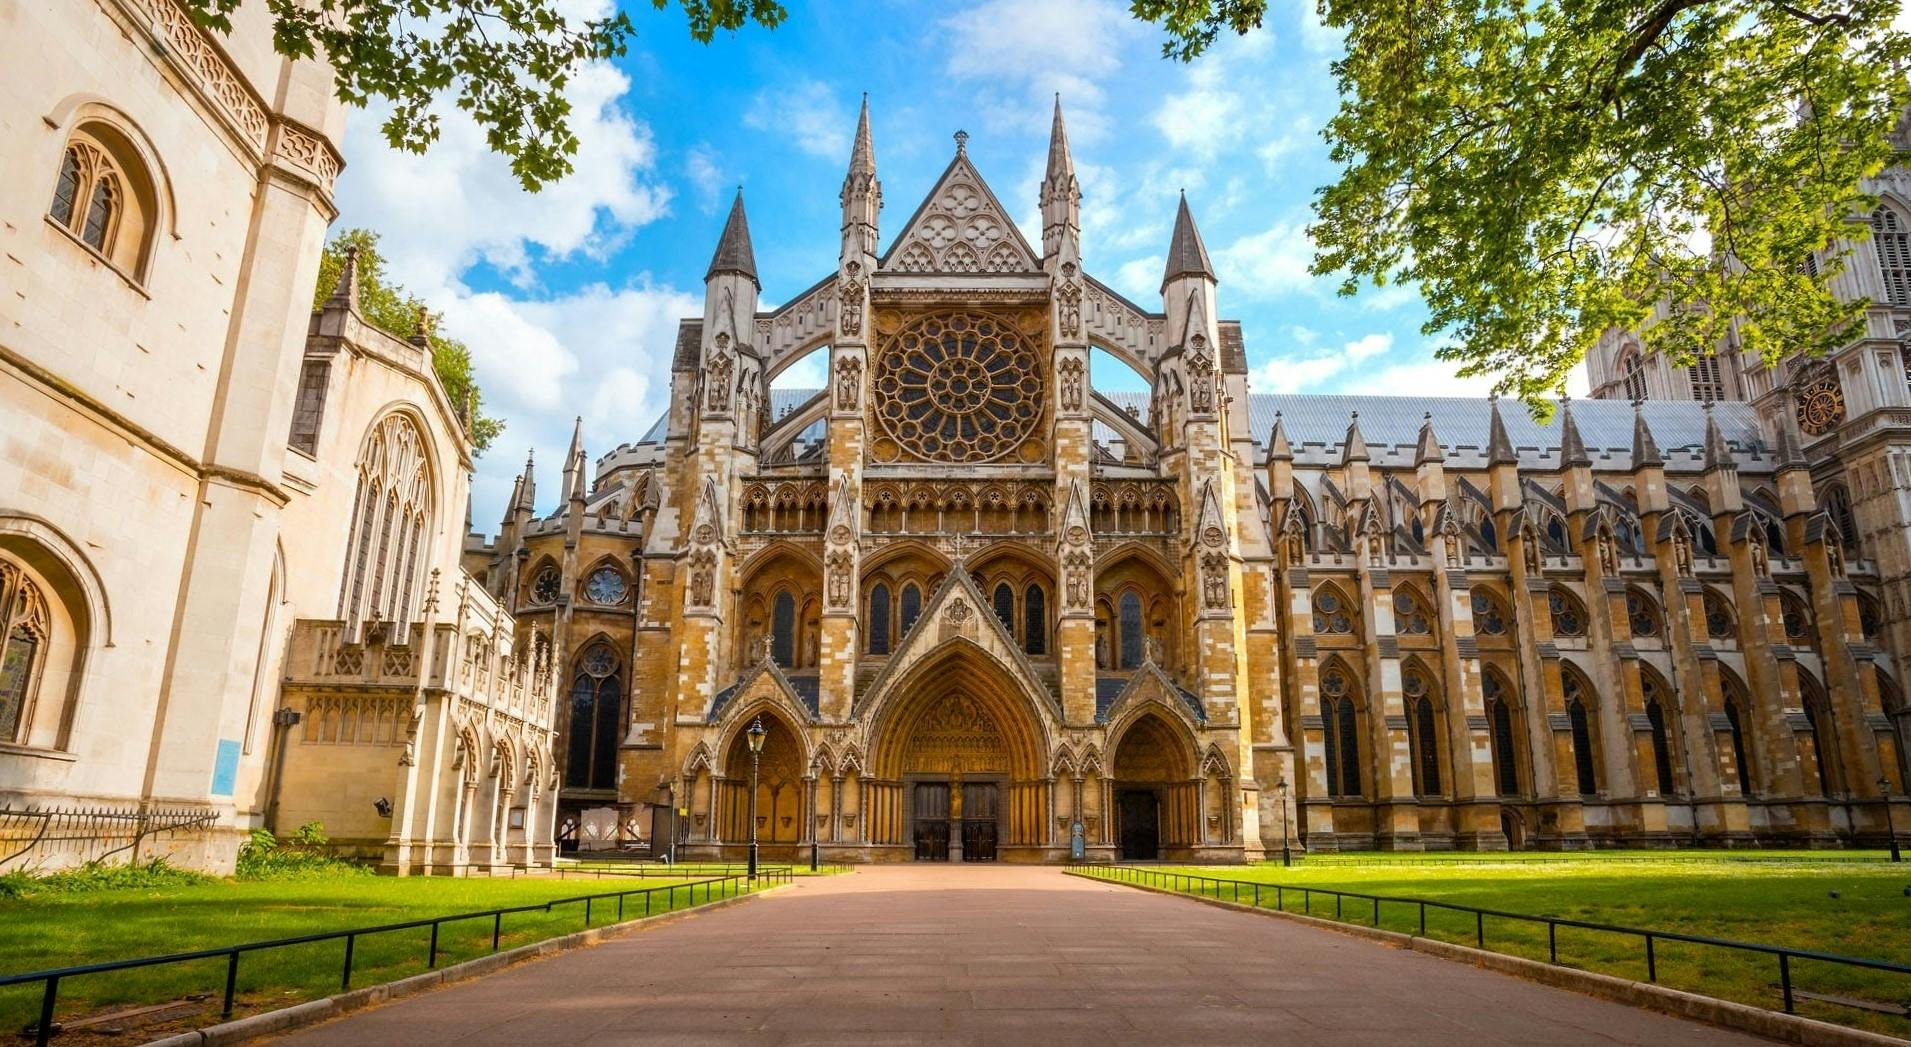 Skip-the-Line Tour of Westminster Abbey with Jubilee Galleries